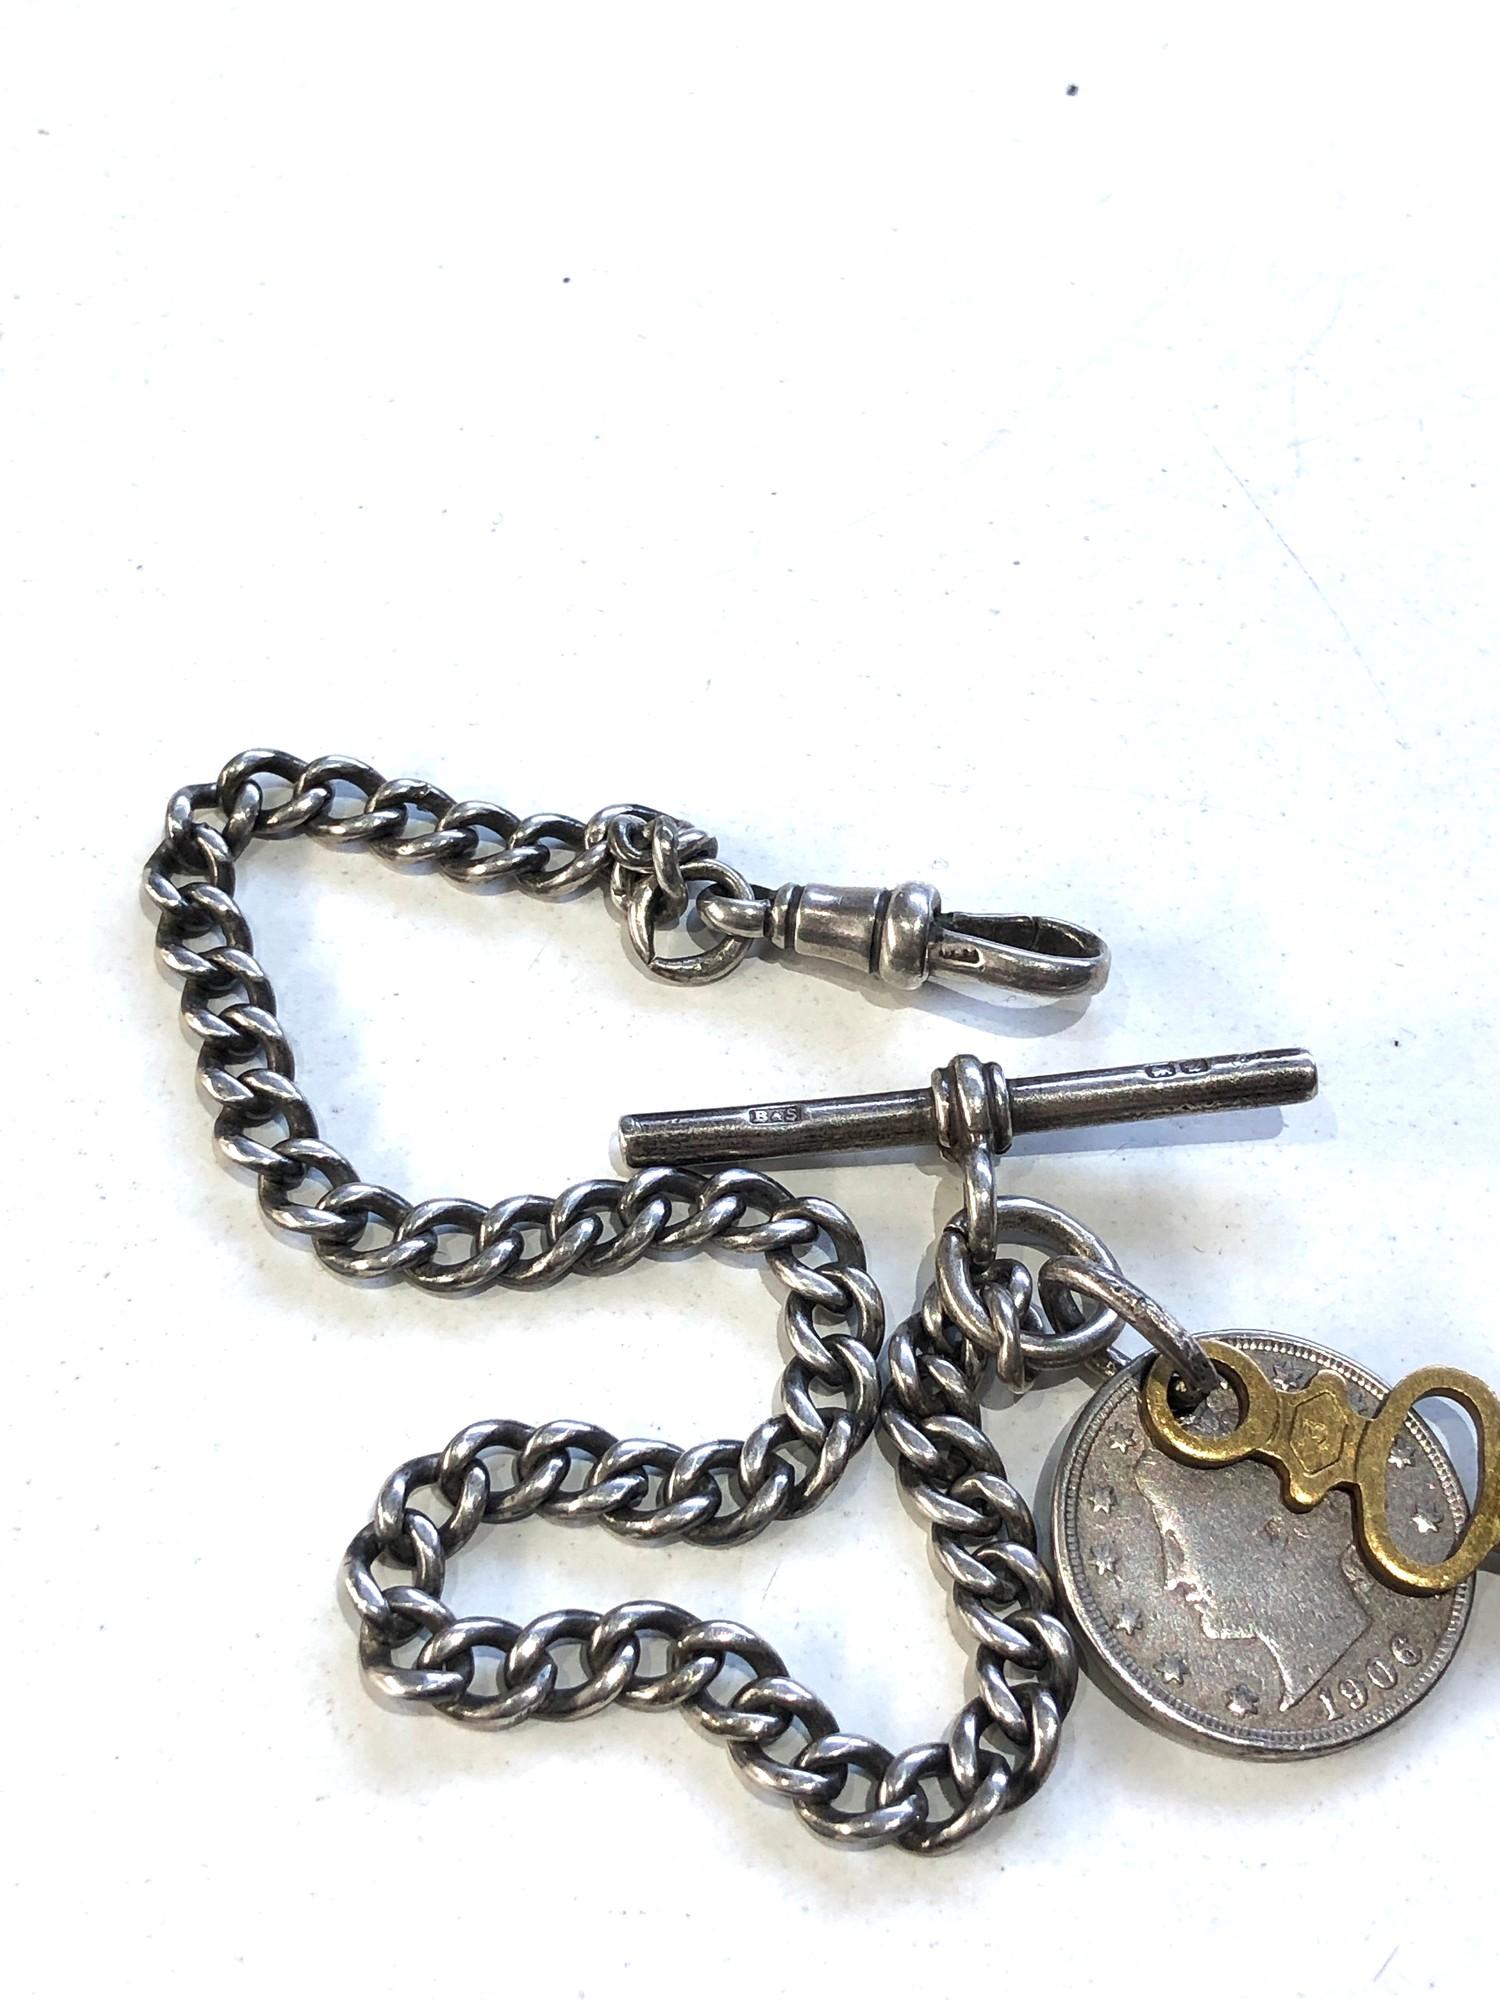 Antique silver Albert watch chain and coin fob & key weight 25g t-bar not silver - Image 3 of 3